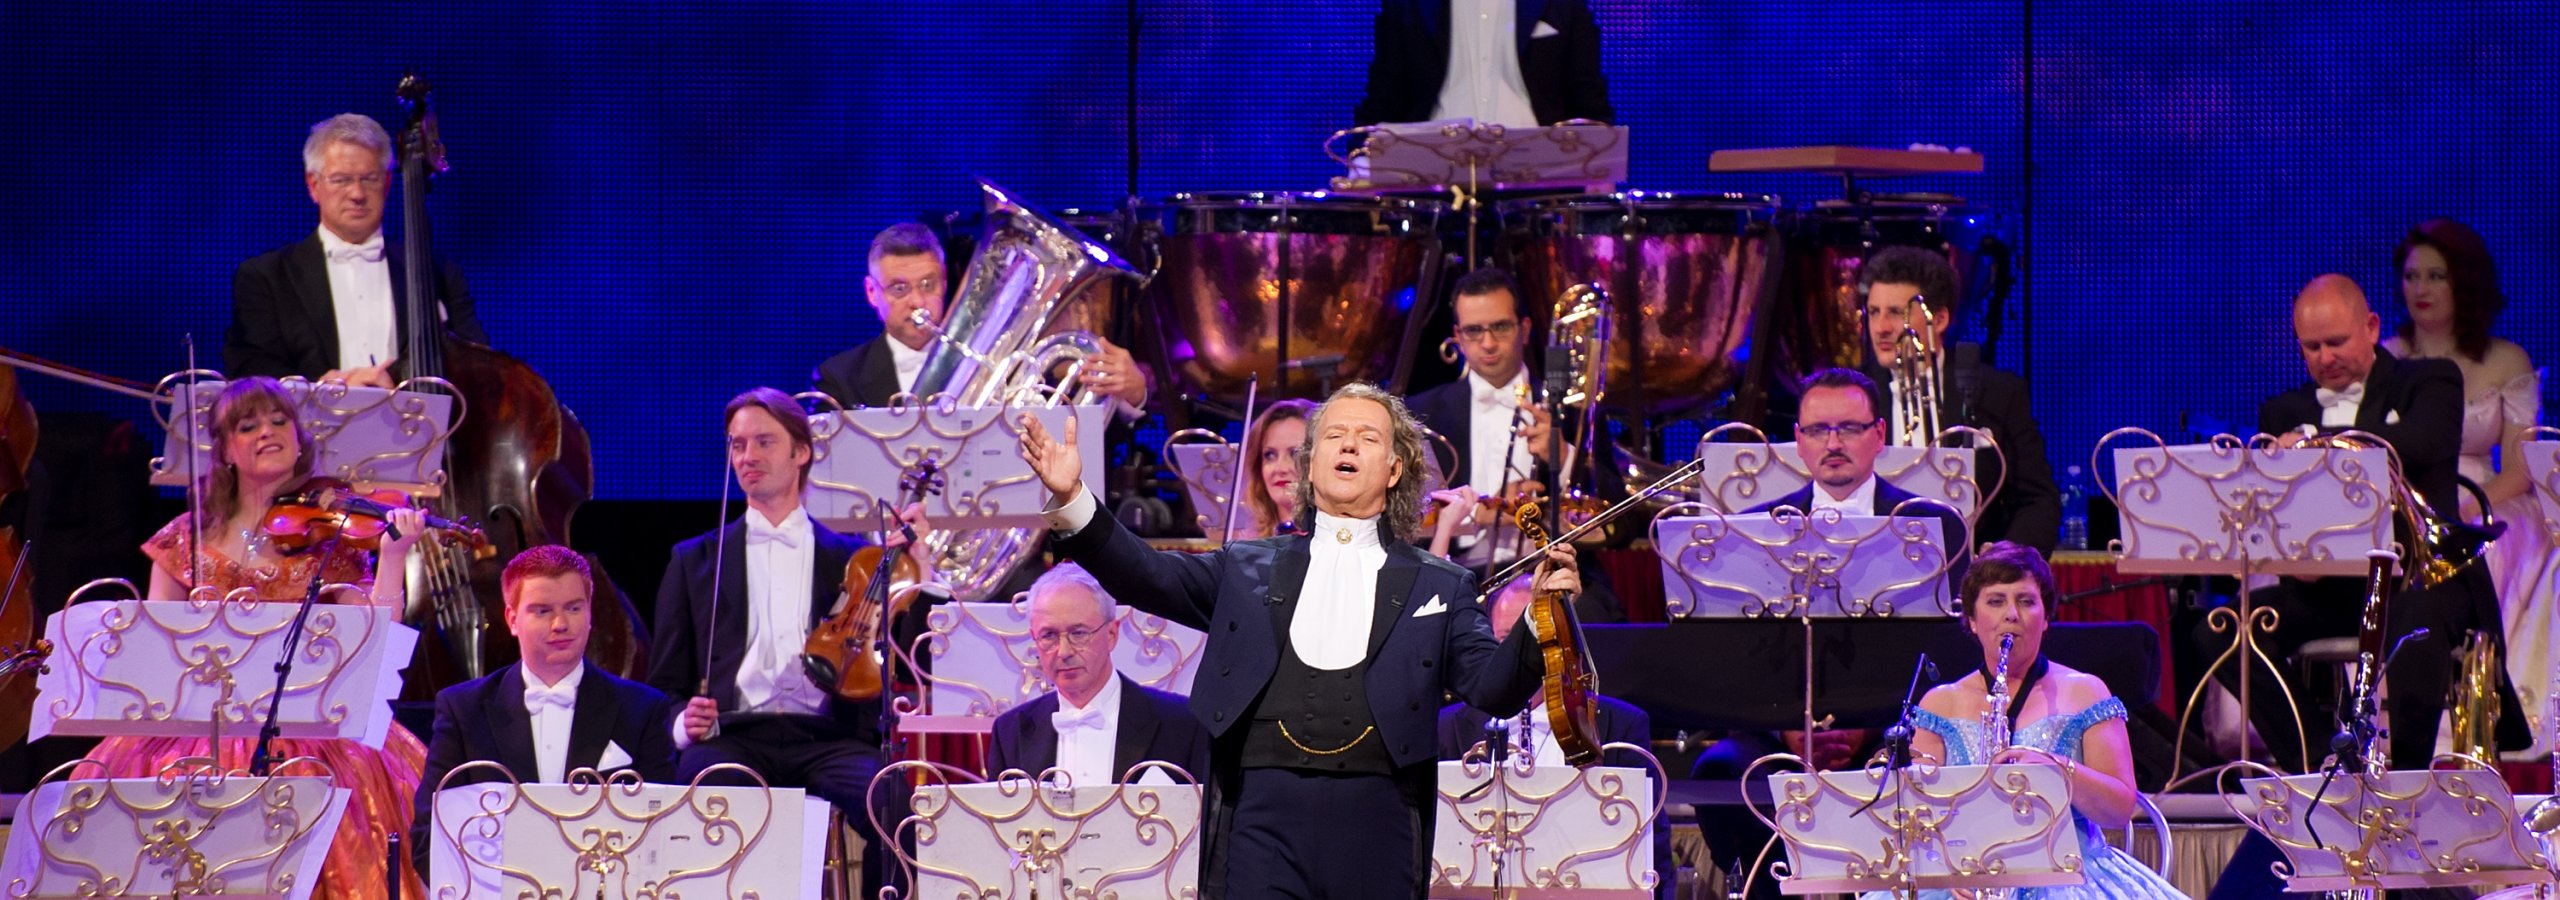 Johann Strauss Orchestra with Andre Rieu2